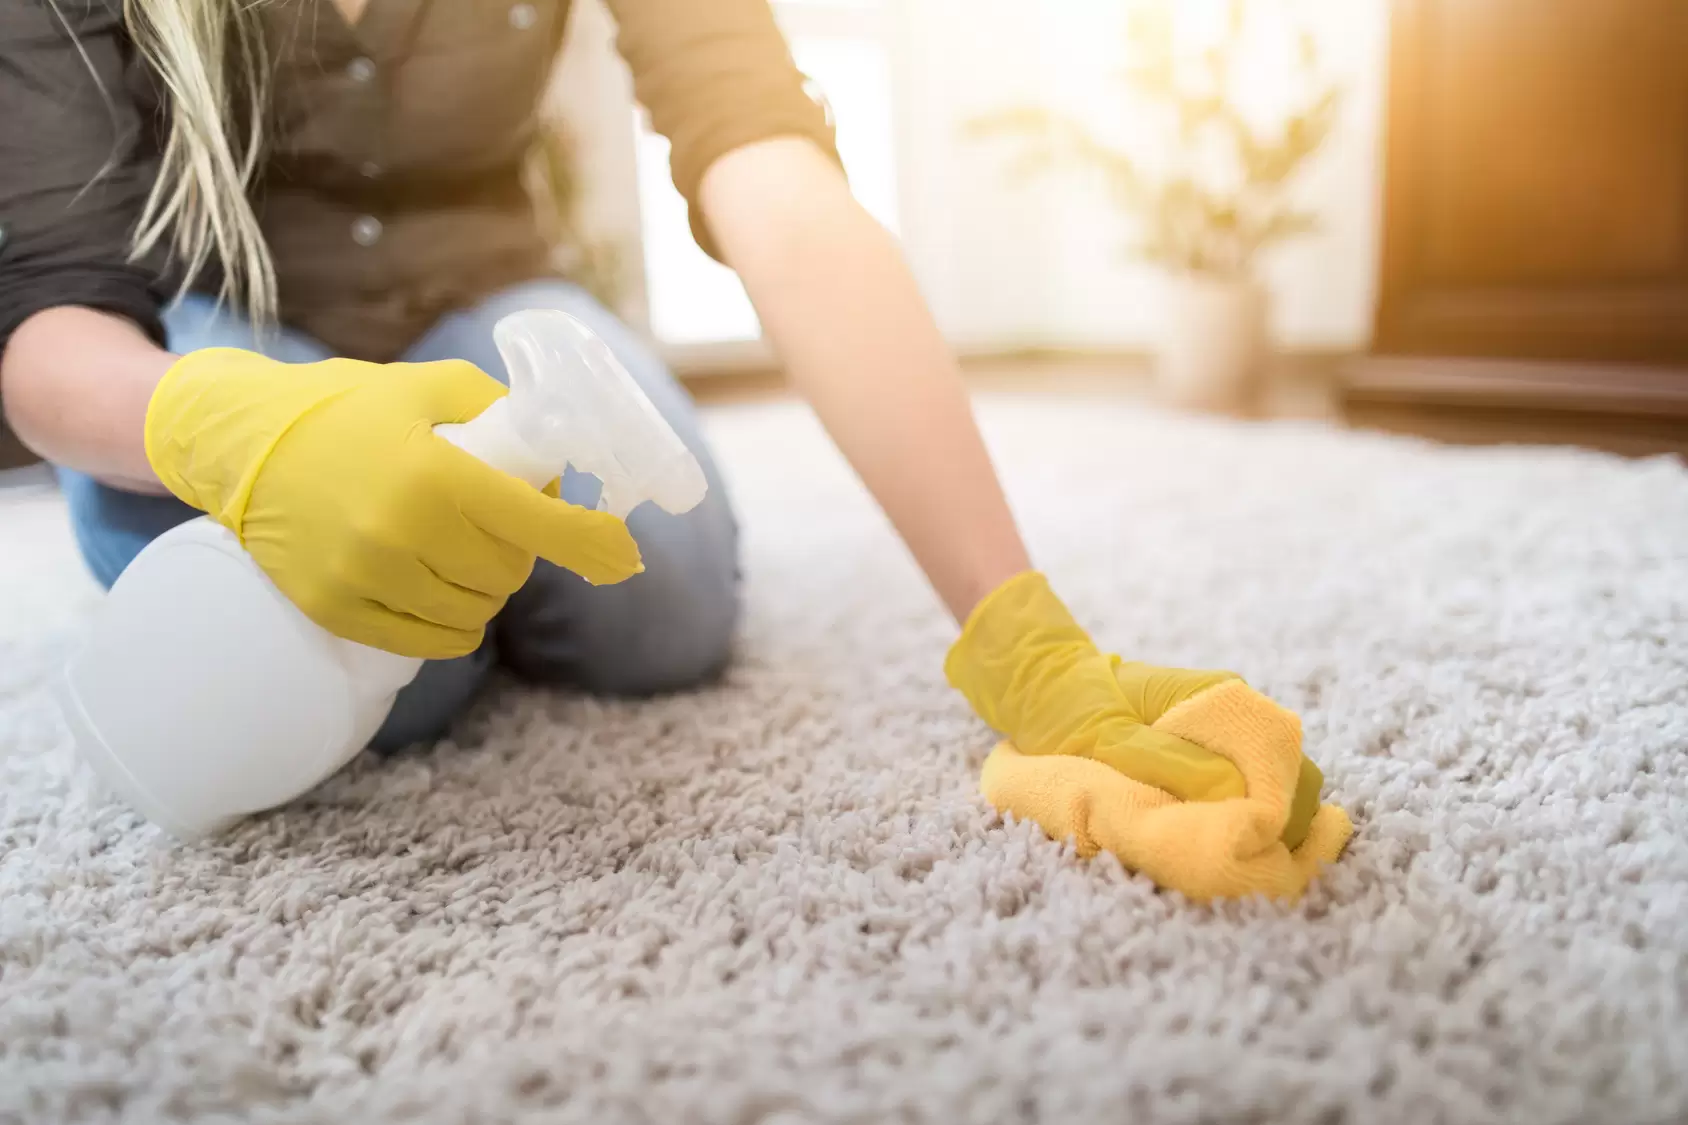 Spilled Something On Your New Carpet? Read These Pro Hacks To Help You Remove Carpet Stains Instantly